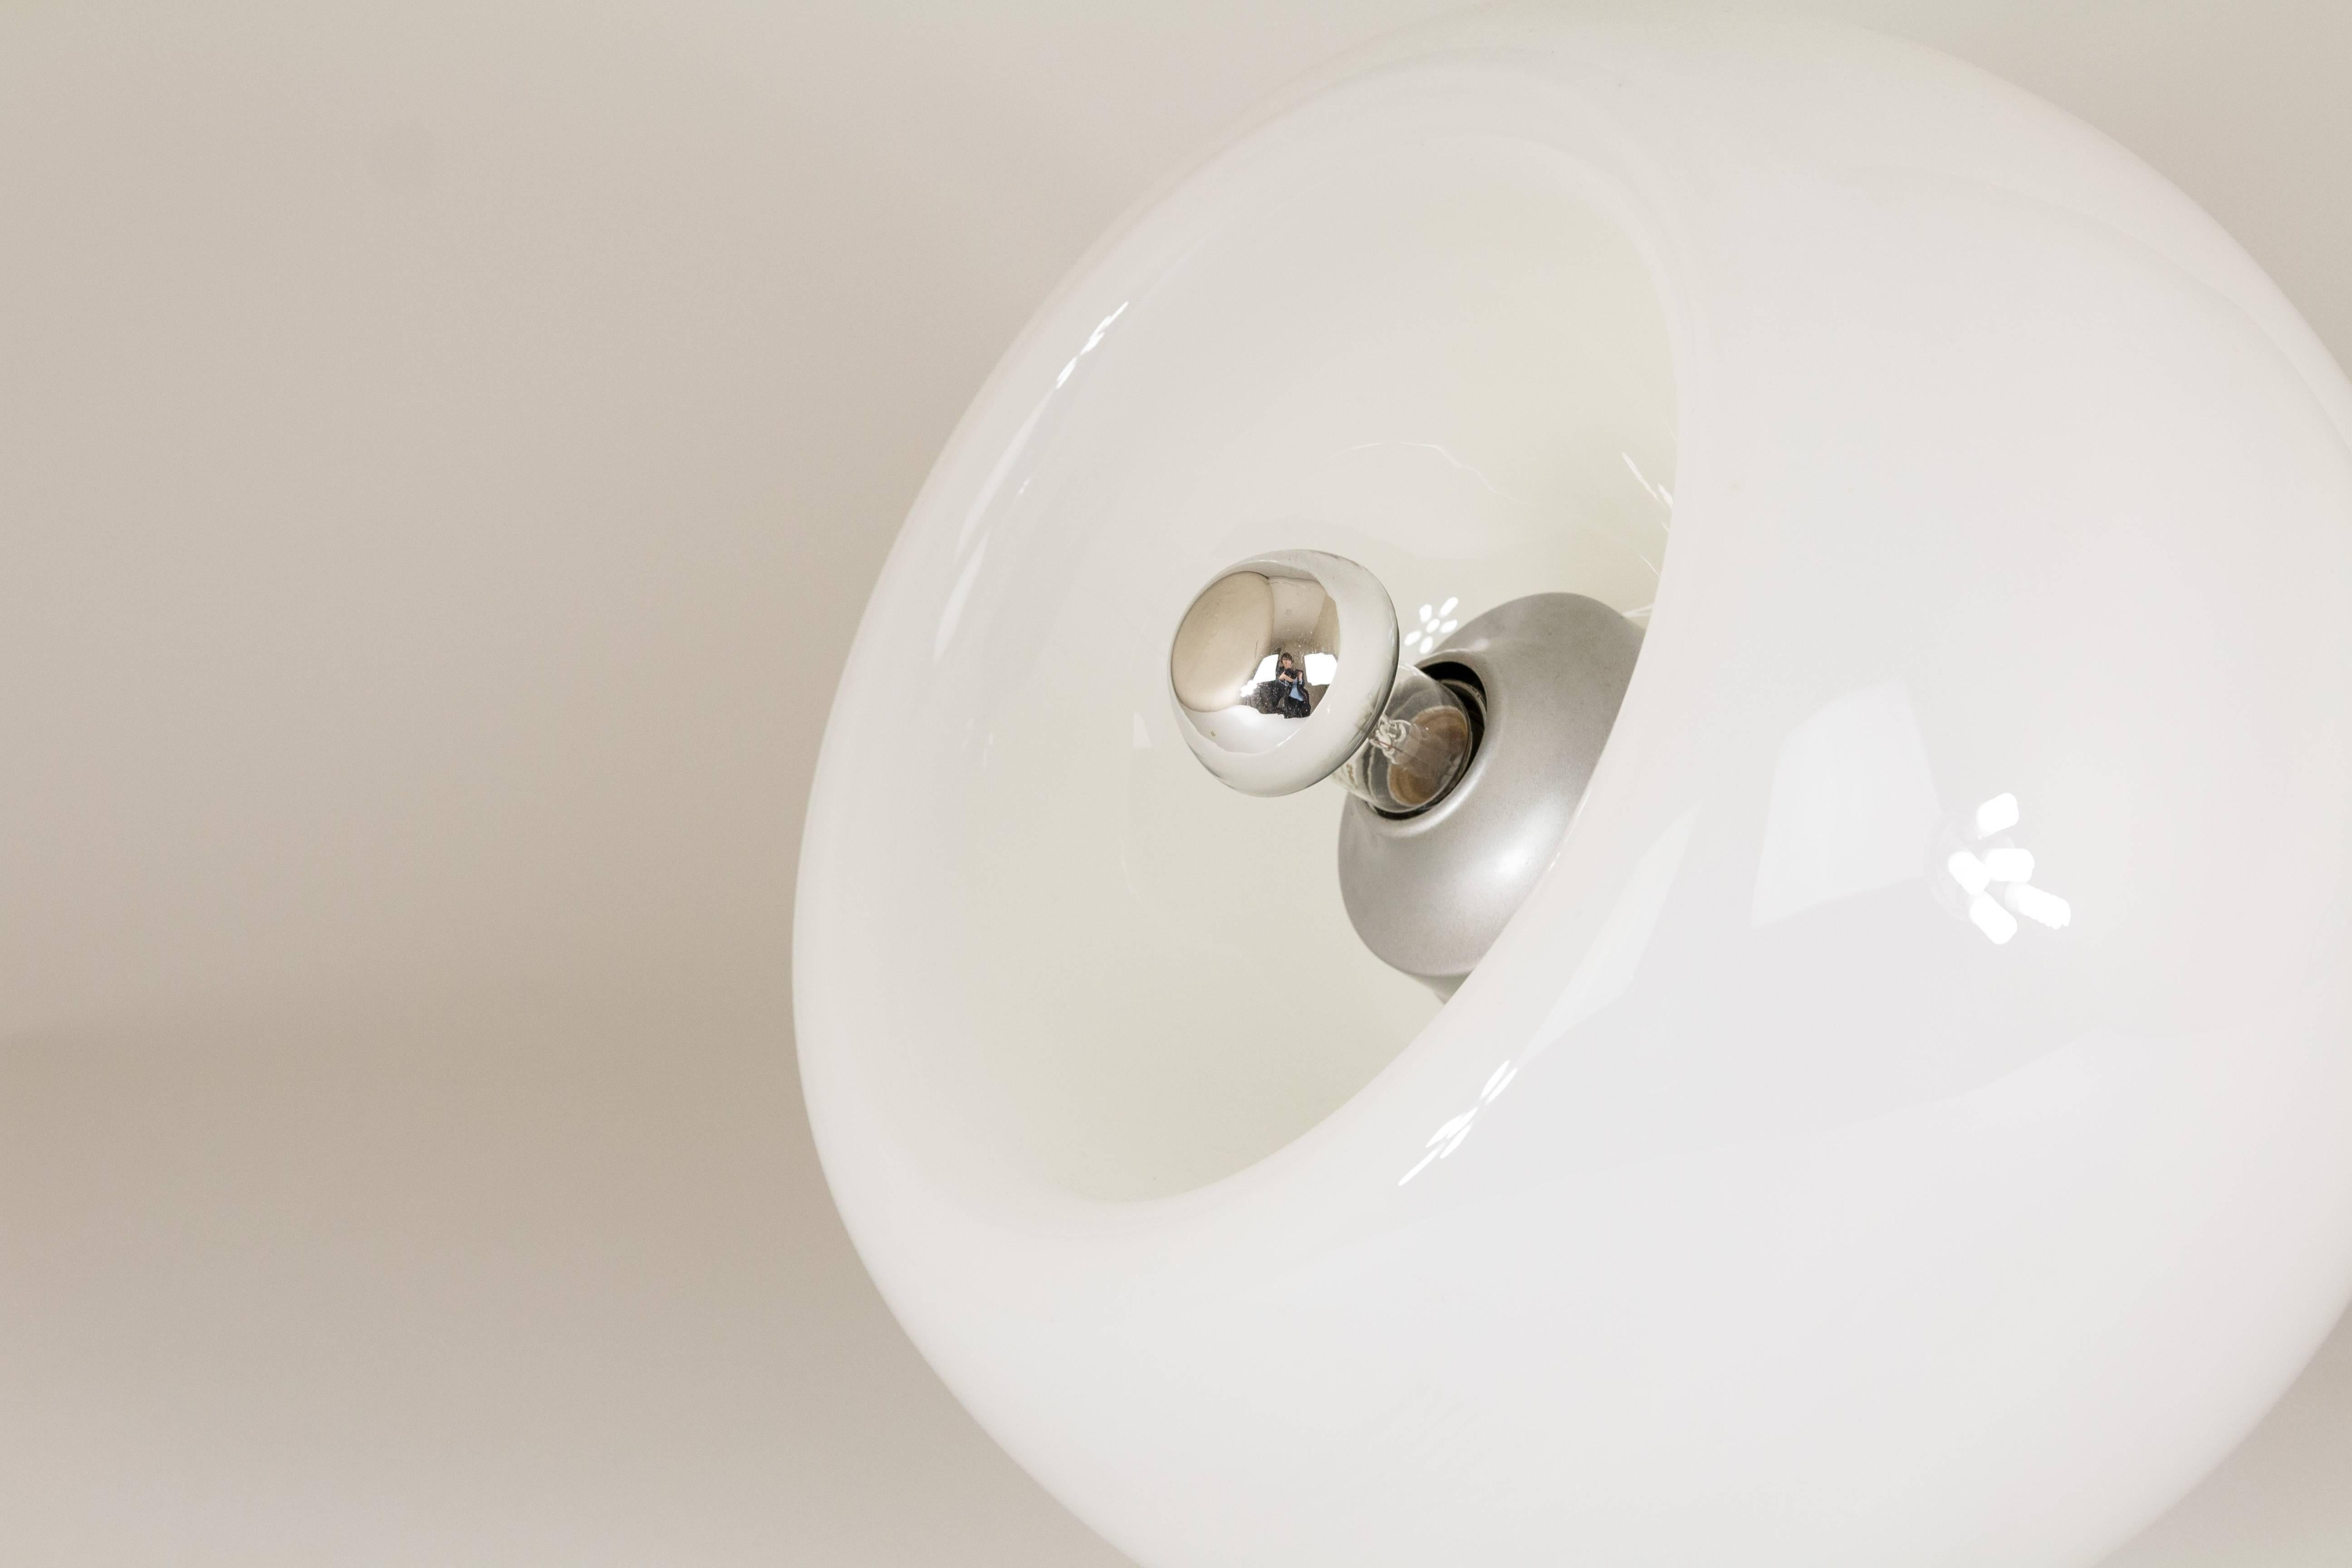 Hand blown glass lamp named Vacuna, designed by Eleonore Peduzzi-Riva for Artemide in 1968. The lamp can be used both as a floor and a table lamp.

This one-piece hand blown glass globe is partially opaque white and partially transparent. The